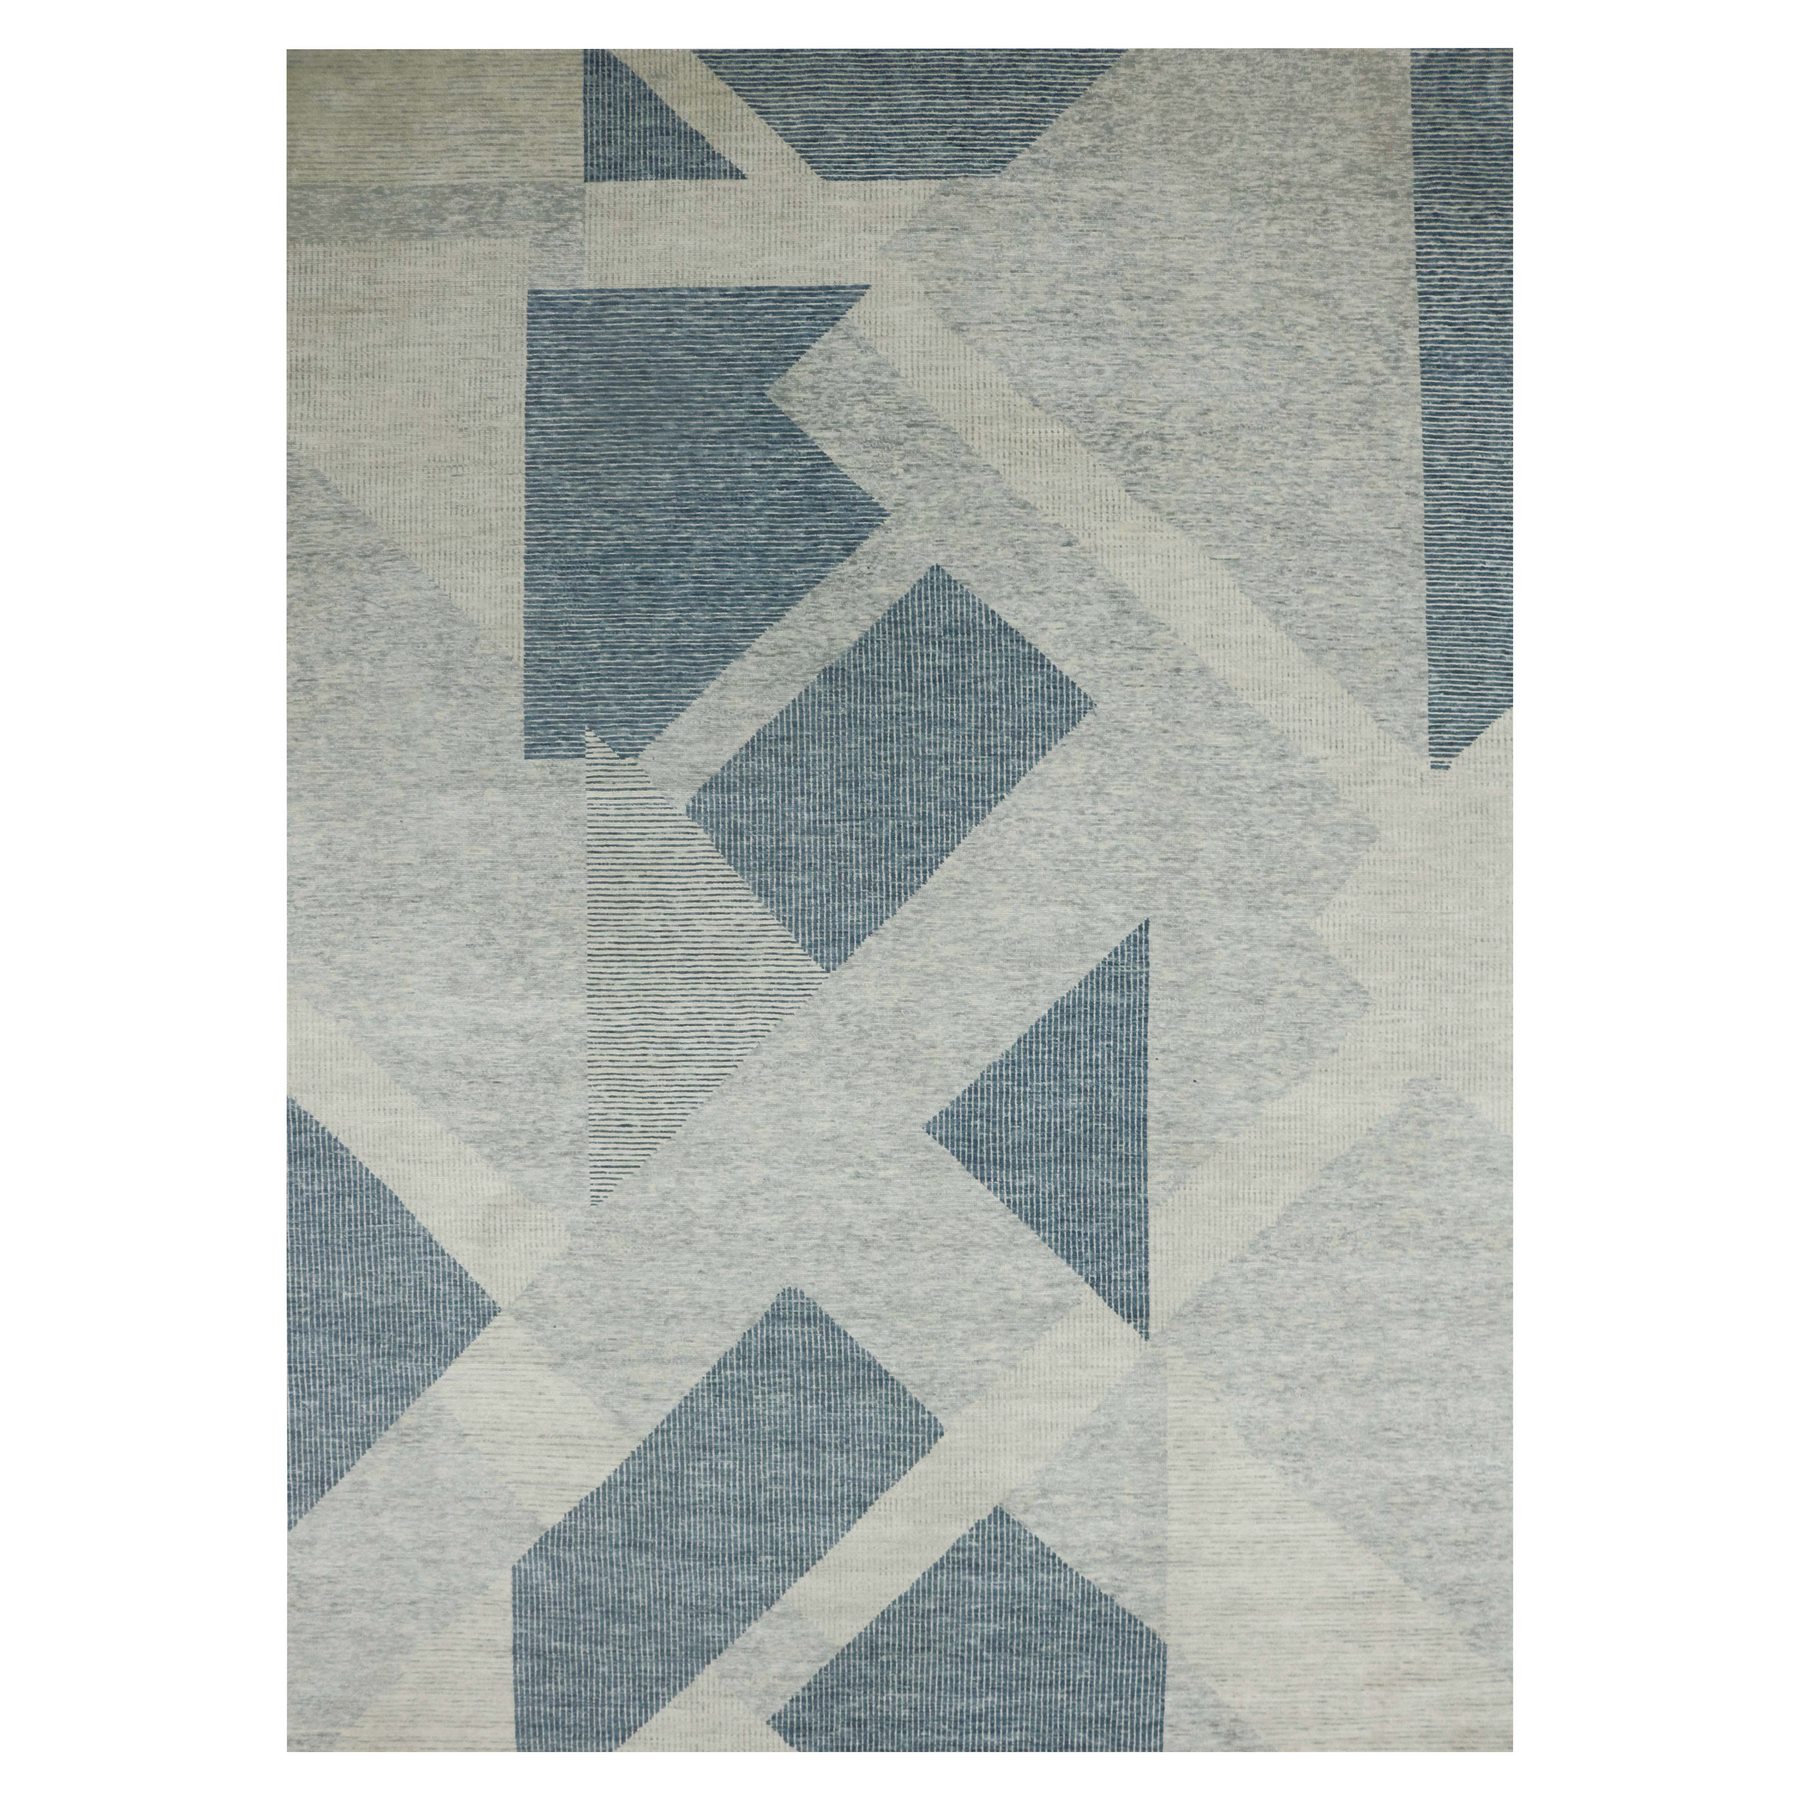  Wool Hand-Knotted Area Rug 10'2